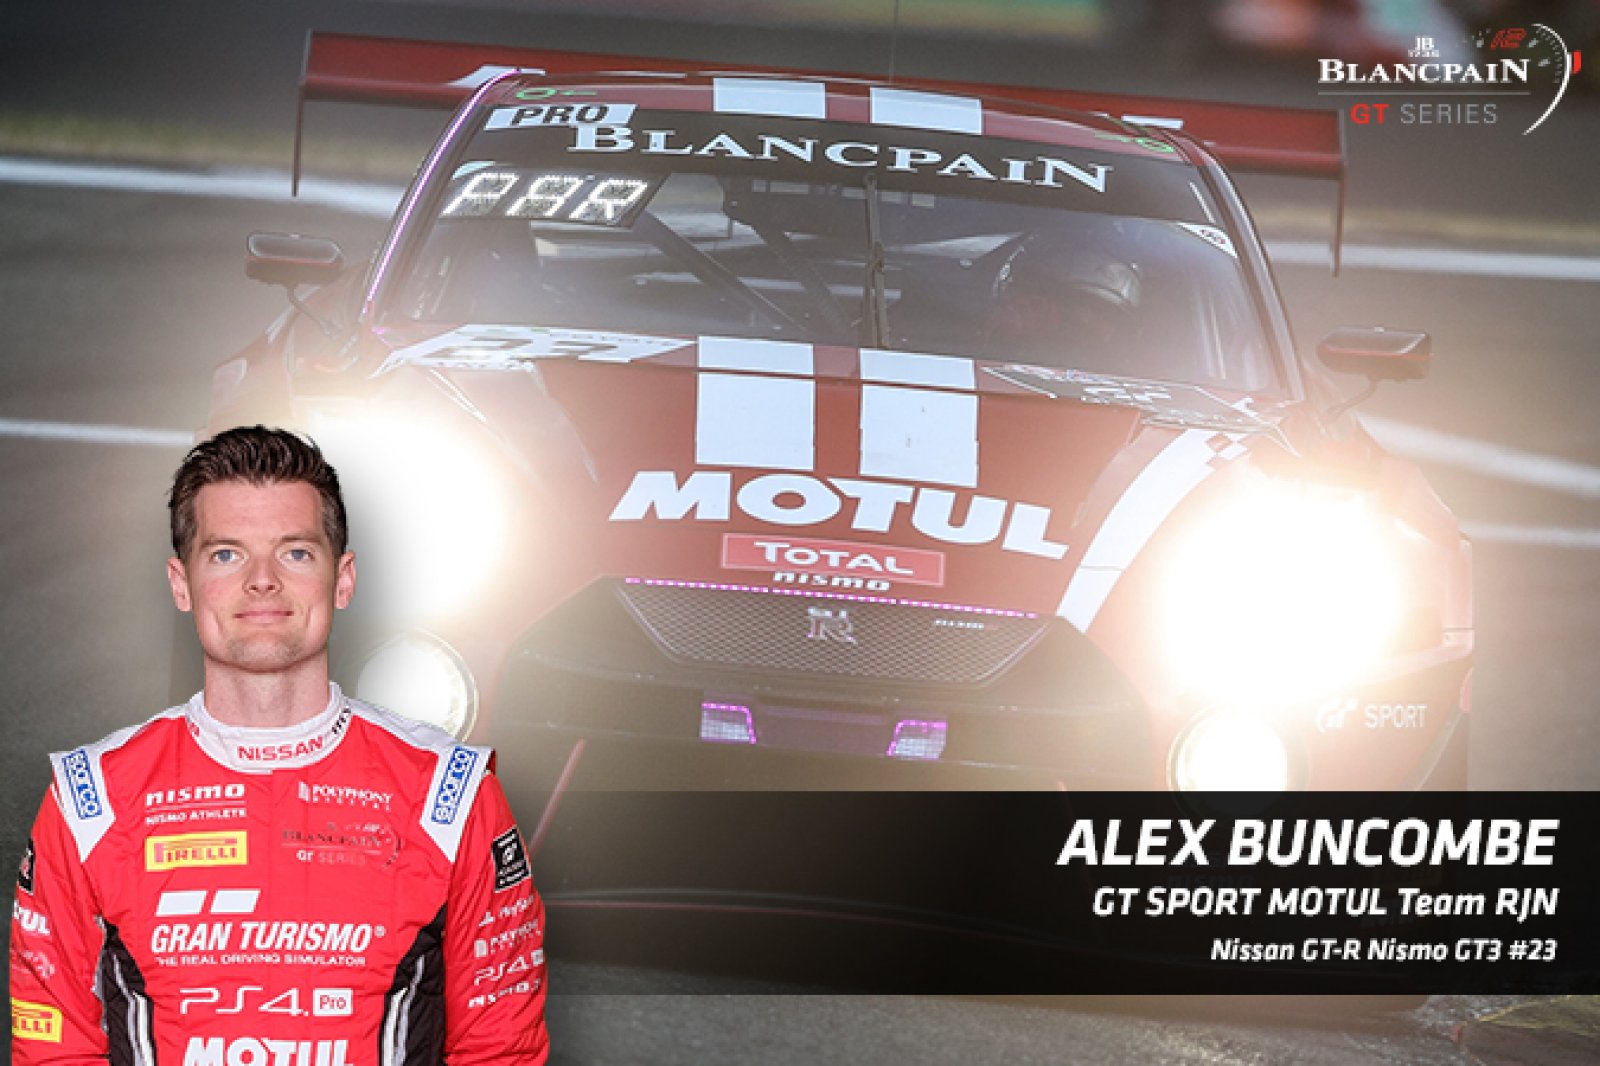 IN PROFILE: Alex Buncombe, the linchpin driver at Team RJN Nissan